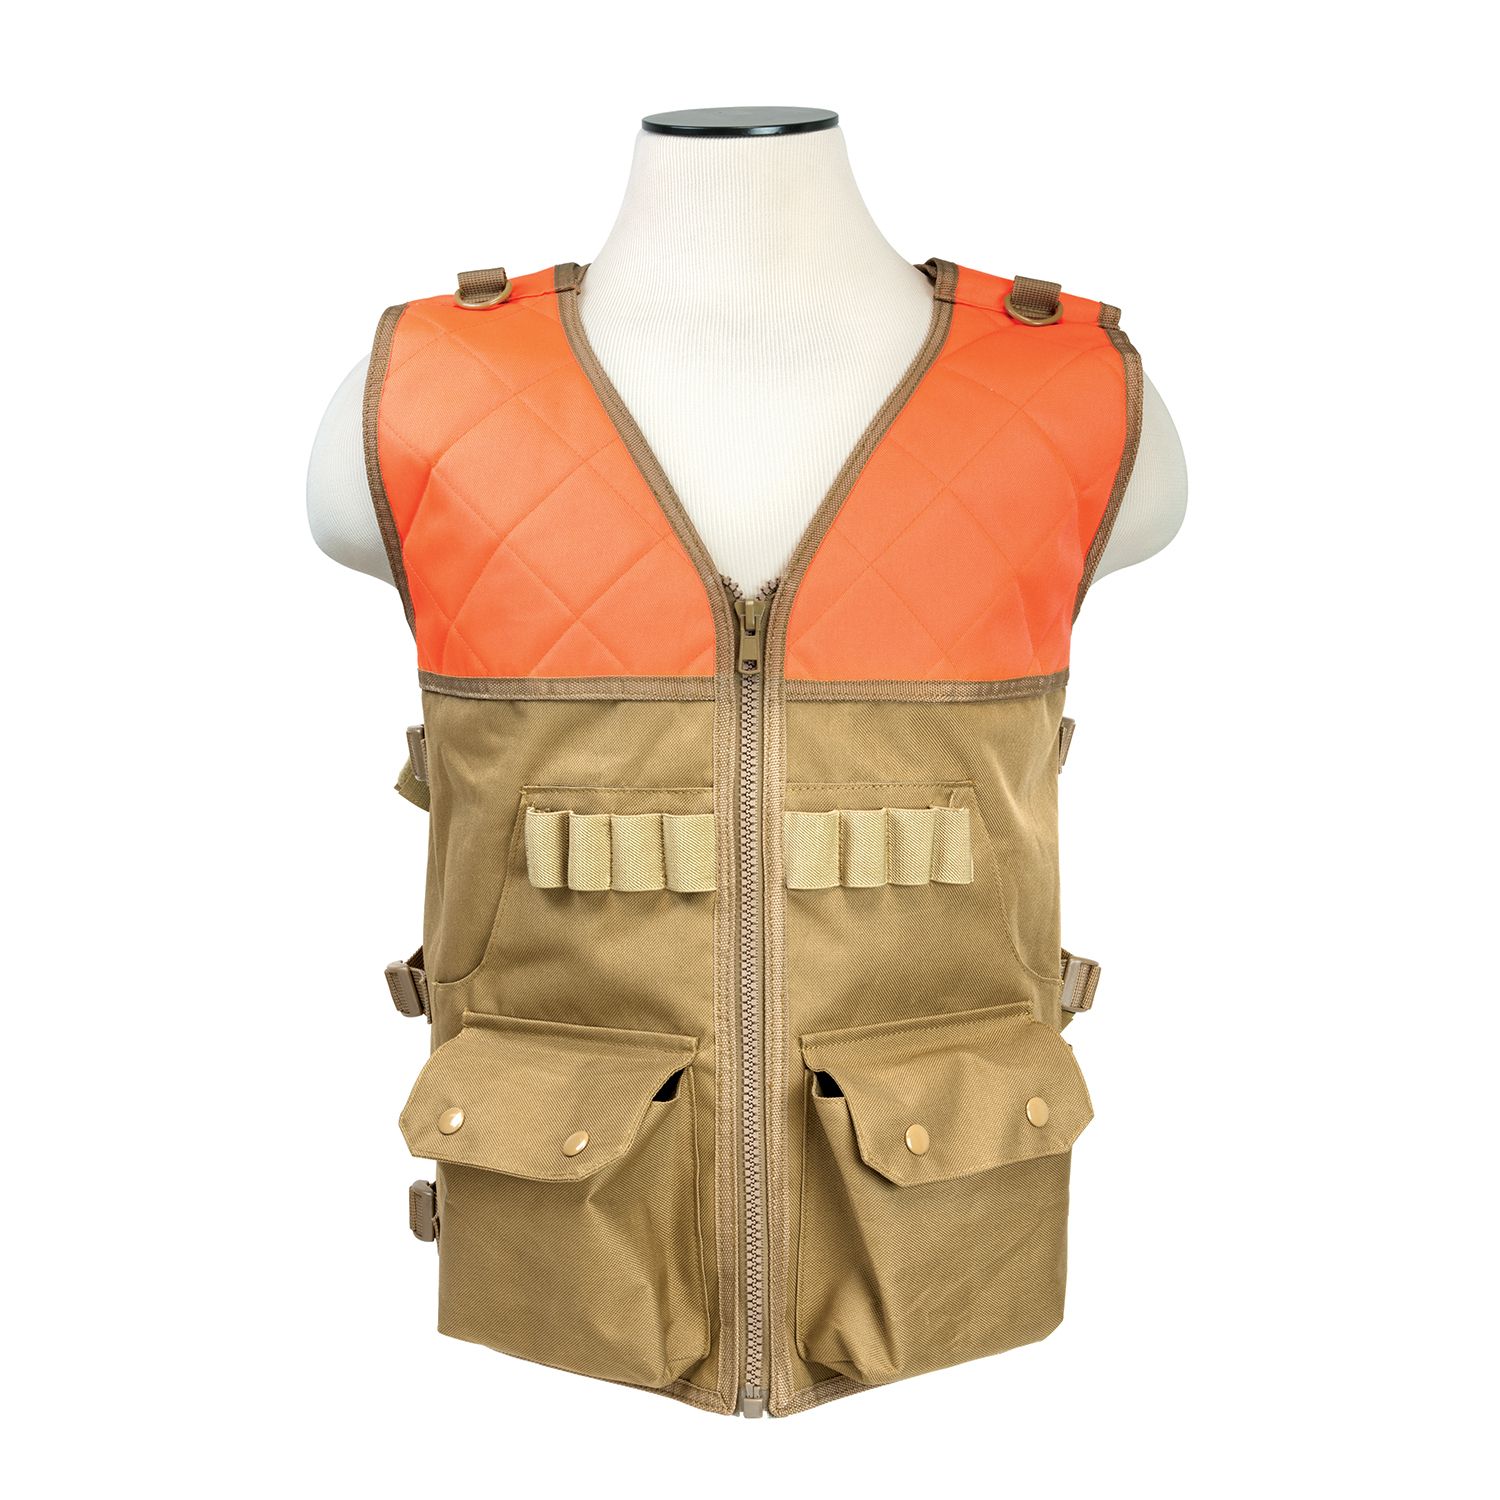 Hunter's Specialties 2001 Youth OSFA Blaze Orange Tactical Safety Hunting Vest 